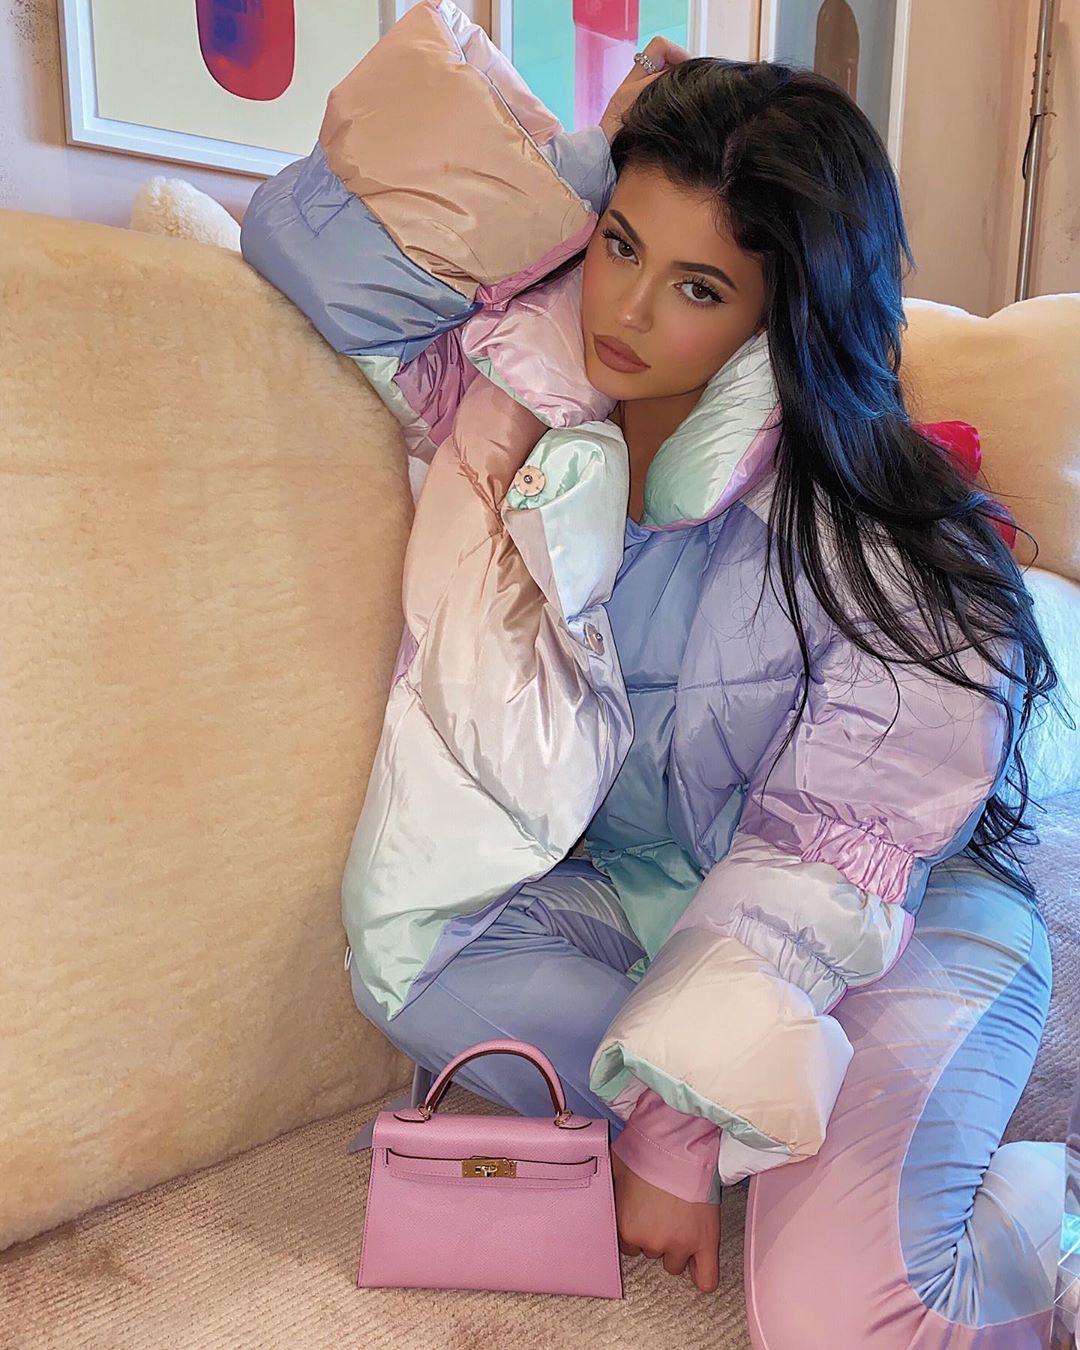 Travel like Kylie Jenner – in style, that is – with these 5 luxury  accessories from Gucci, Celine and more, even if you're headed for a  staycation